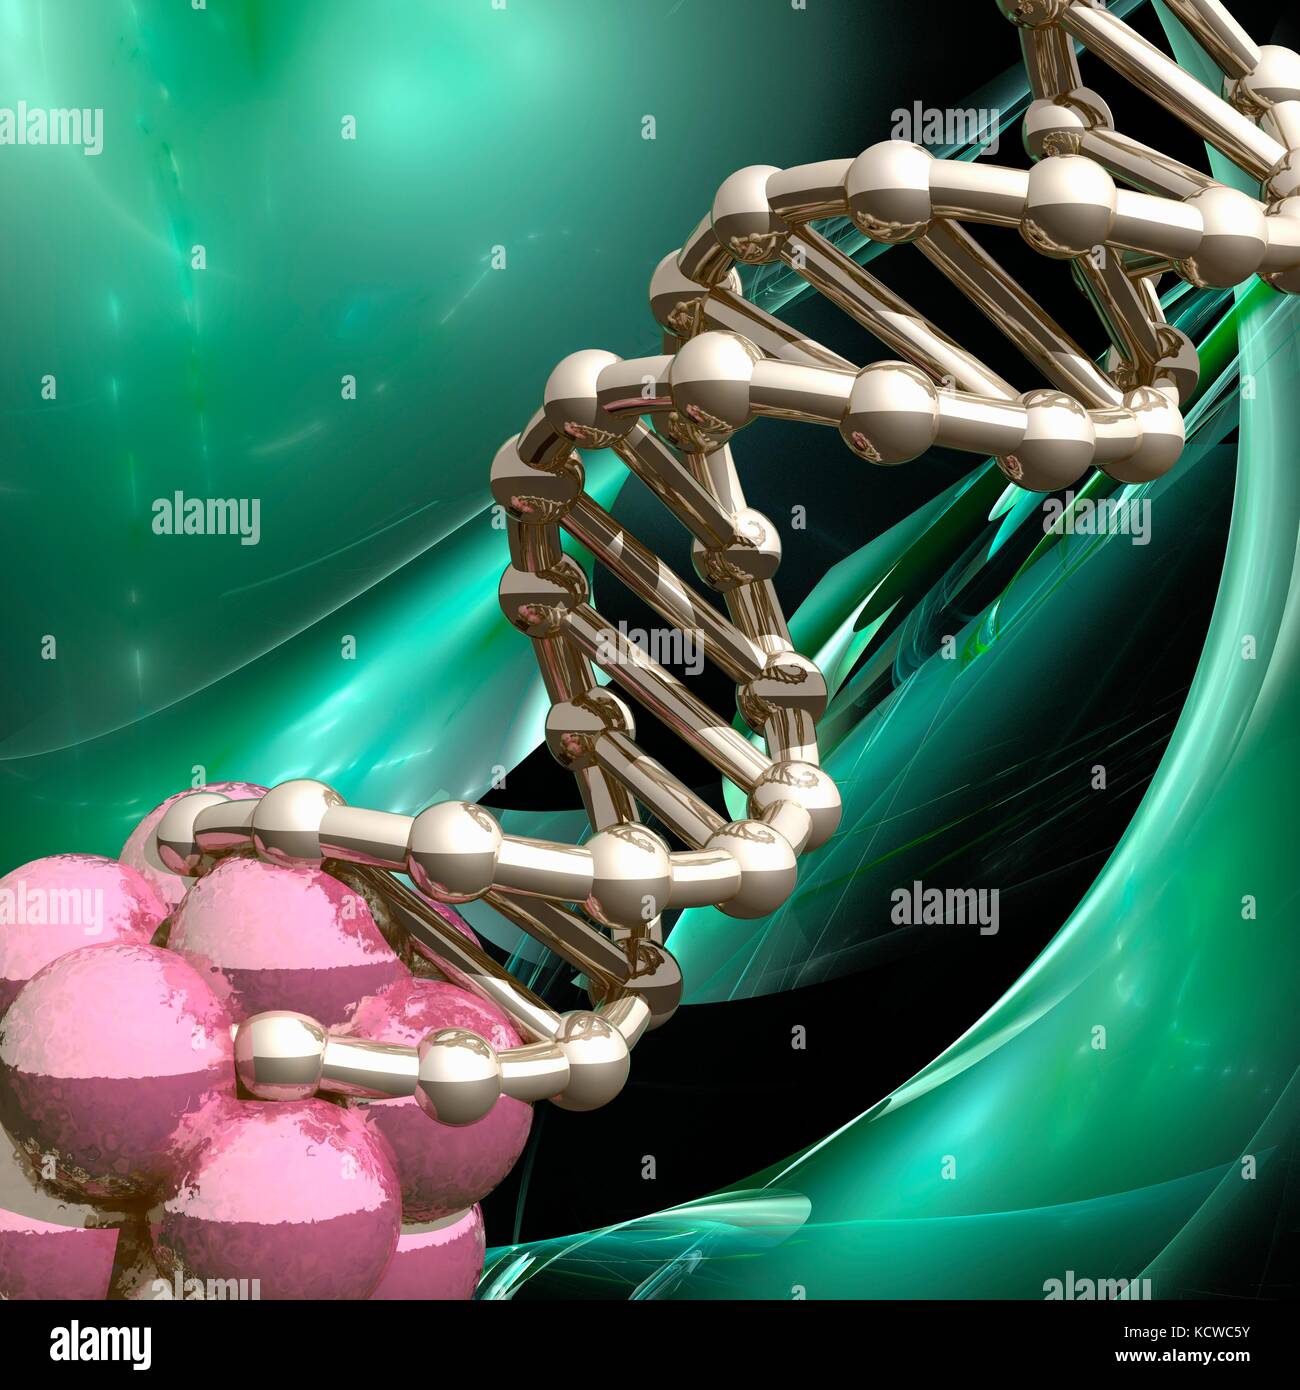 Conceptual illustration of a double stranded DNA (deoxyribonucleic acid) molecule exiting a cell cluster. DNA is composed of two strands twisted into a double helix. Each strand consists of a sugar-phosphate backbone attached to nucleotide bases. There are four bases: adenine, cytosine, guanine and thymine. The bases are joined together by hydrogen bonds. DNA contains sections called genes that encode the body's genetic information. Stock Photo